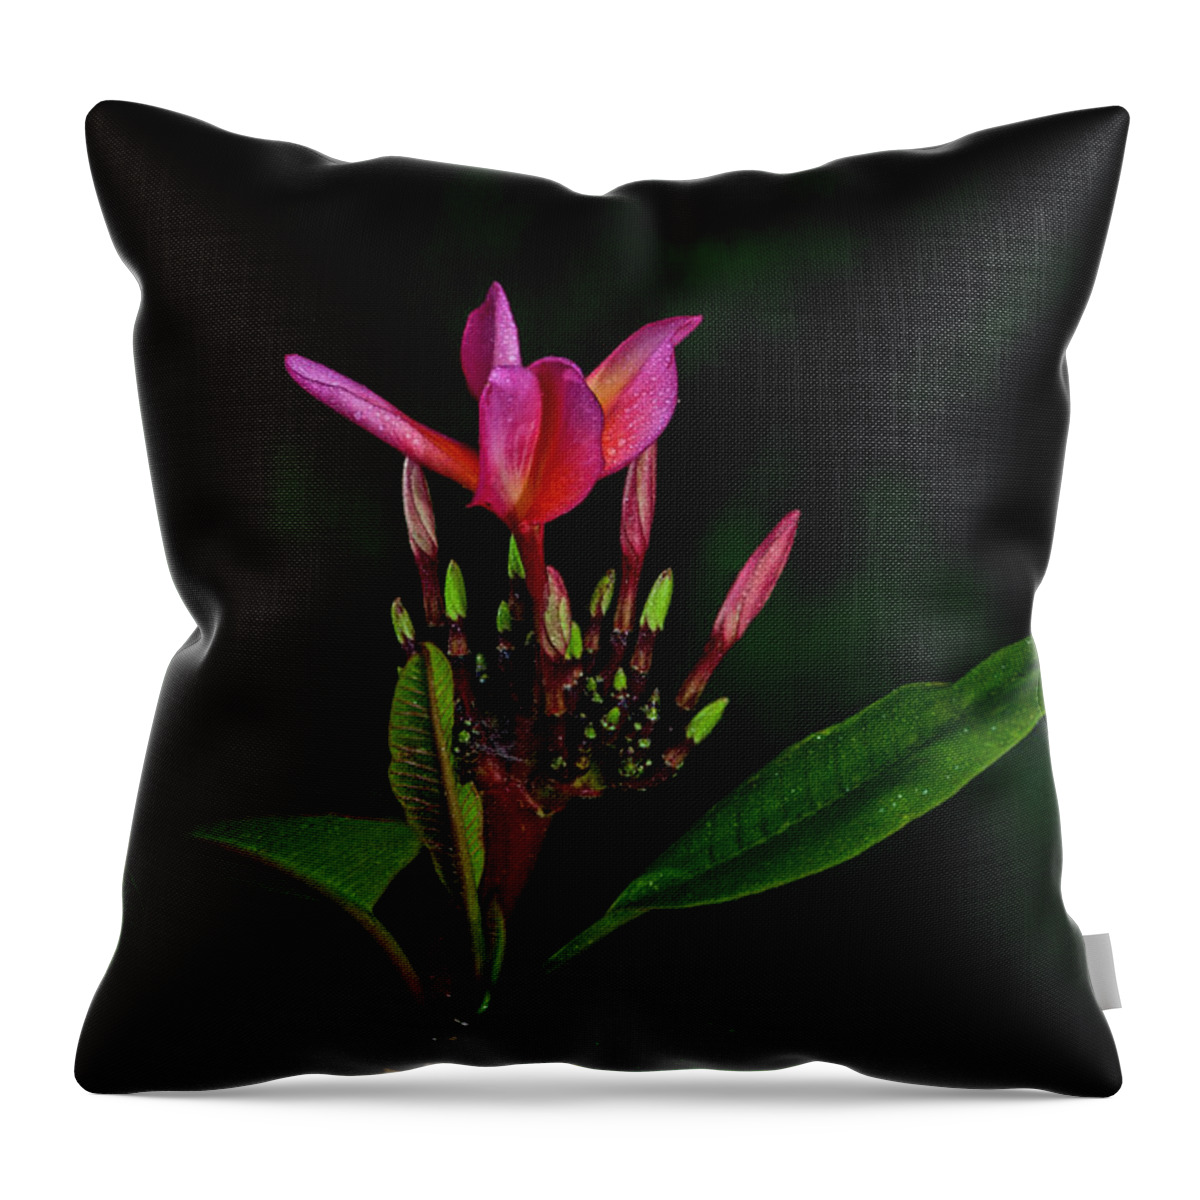 Red Flower Throw Pillow featuring the photograph Red Plumeria by John A Rodriguez